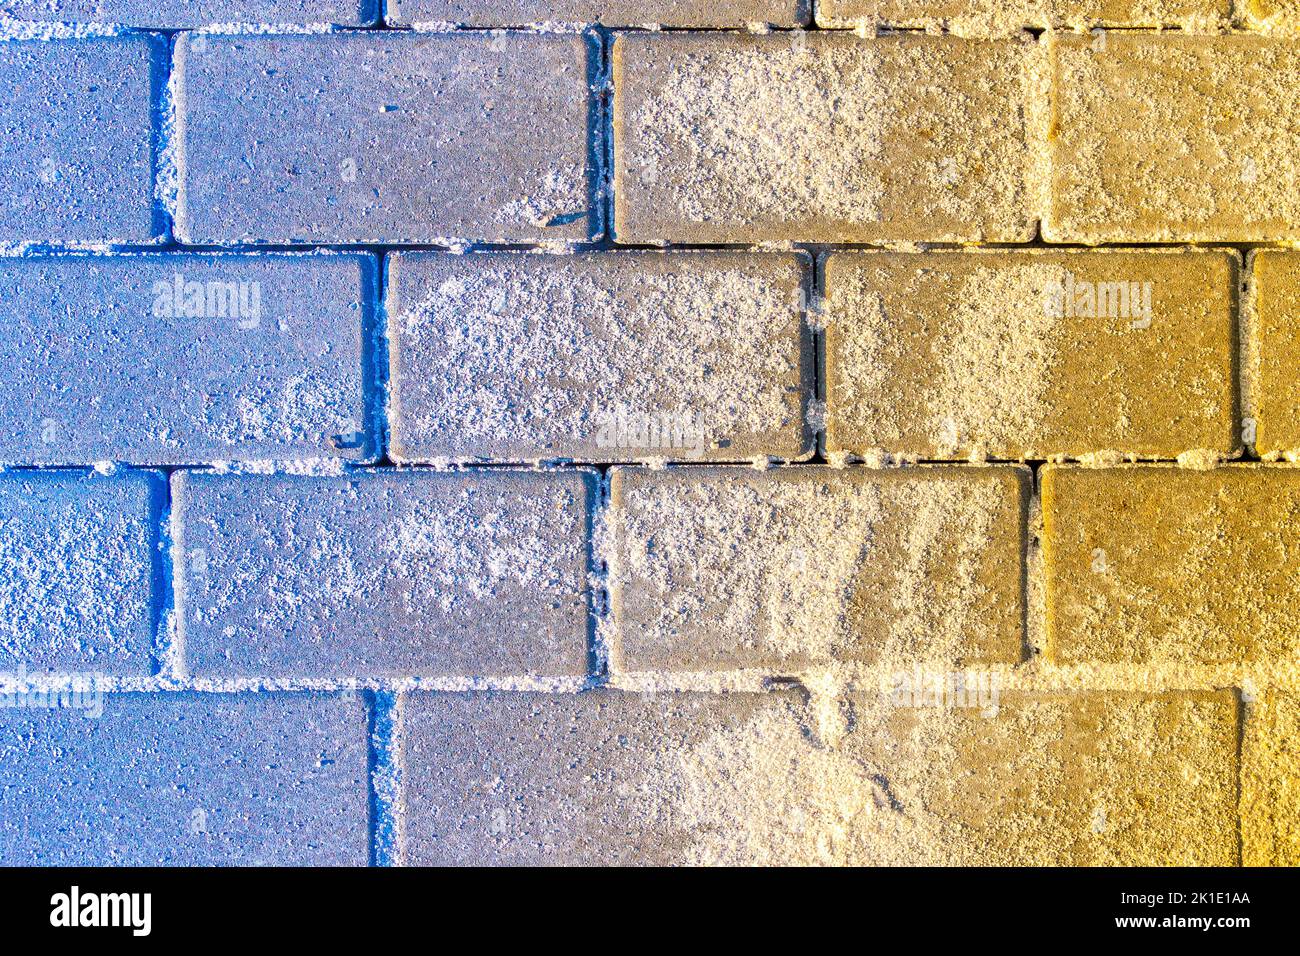 blue-yellow hailstone superimposed on stacked paving slabs sprinkled with sand, selective focus Stock Photo